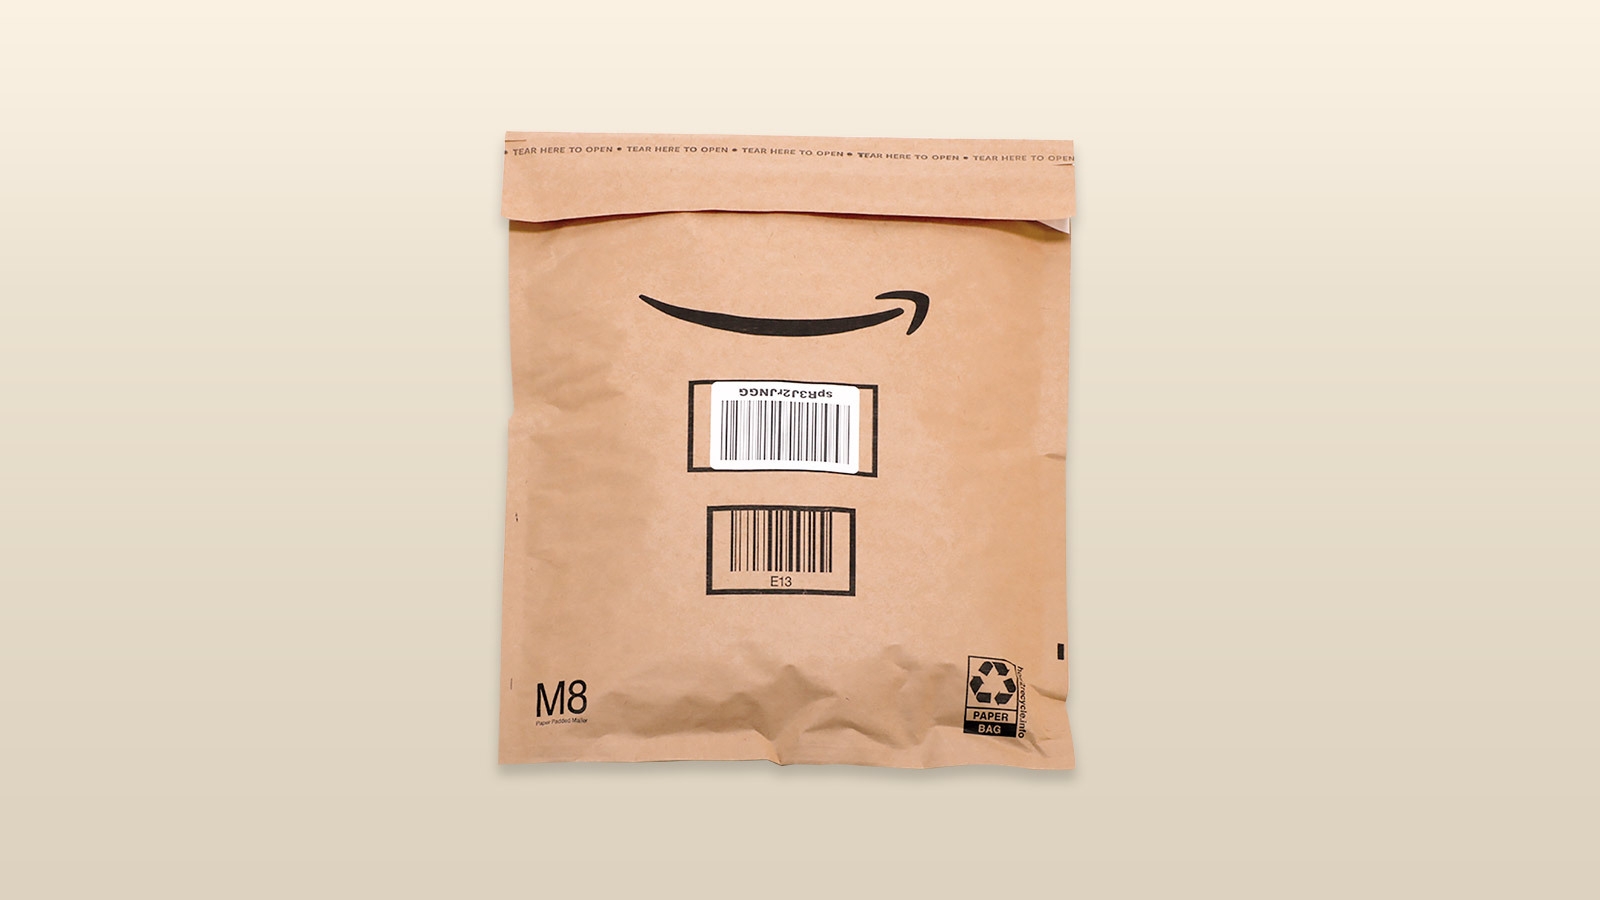 An image of an amazon package with a beige background.